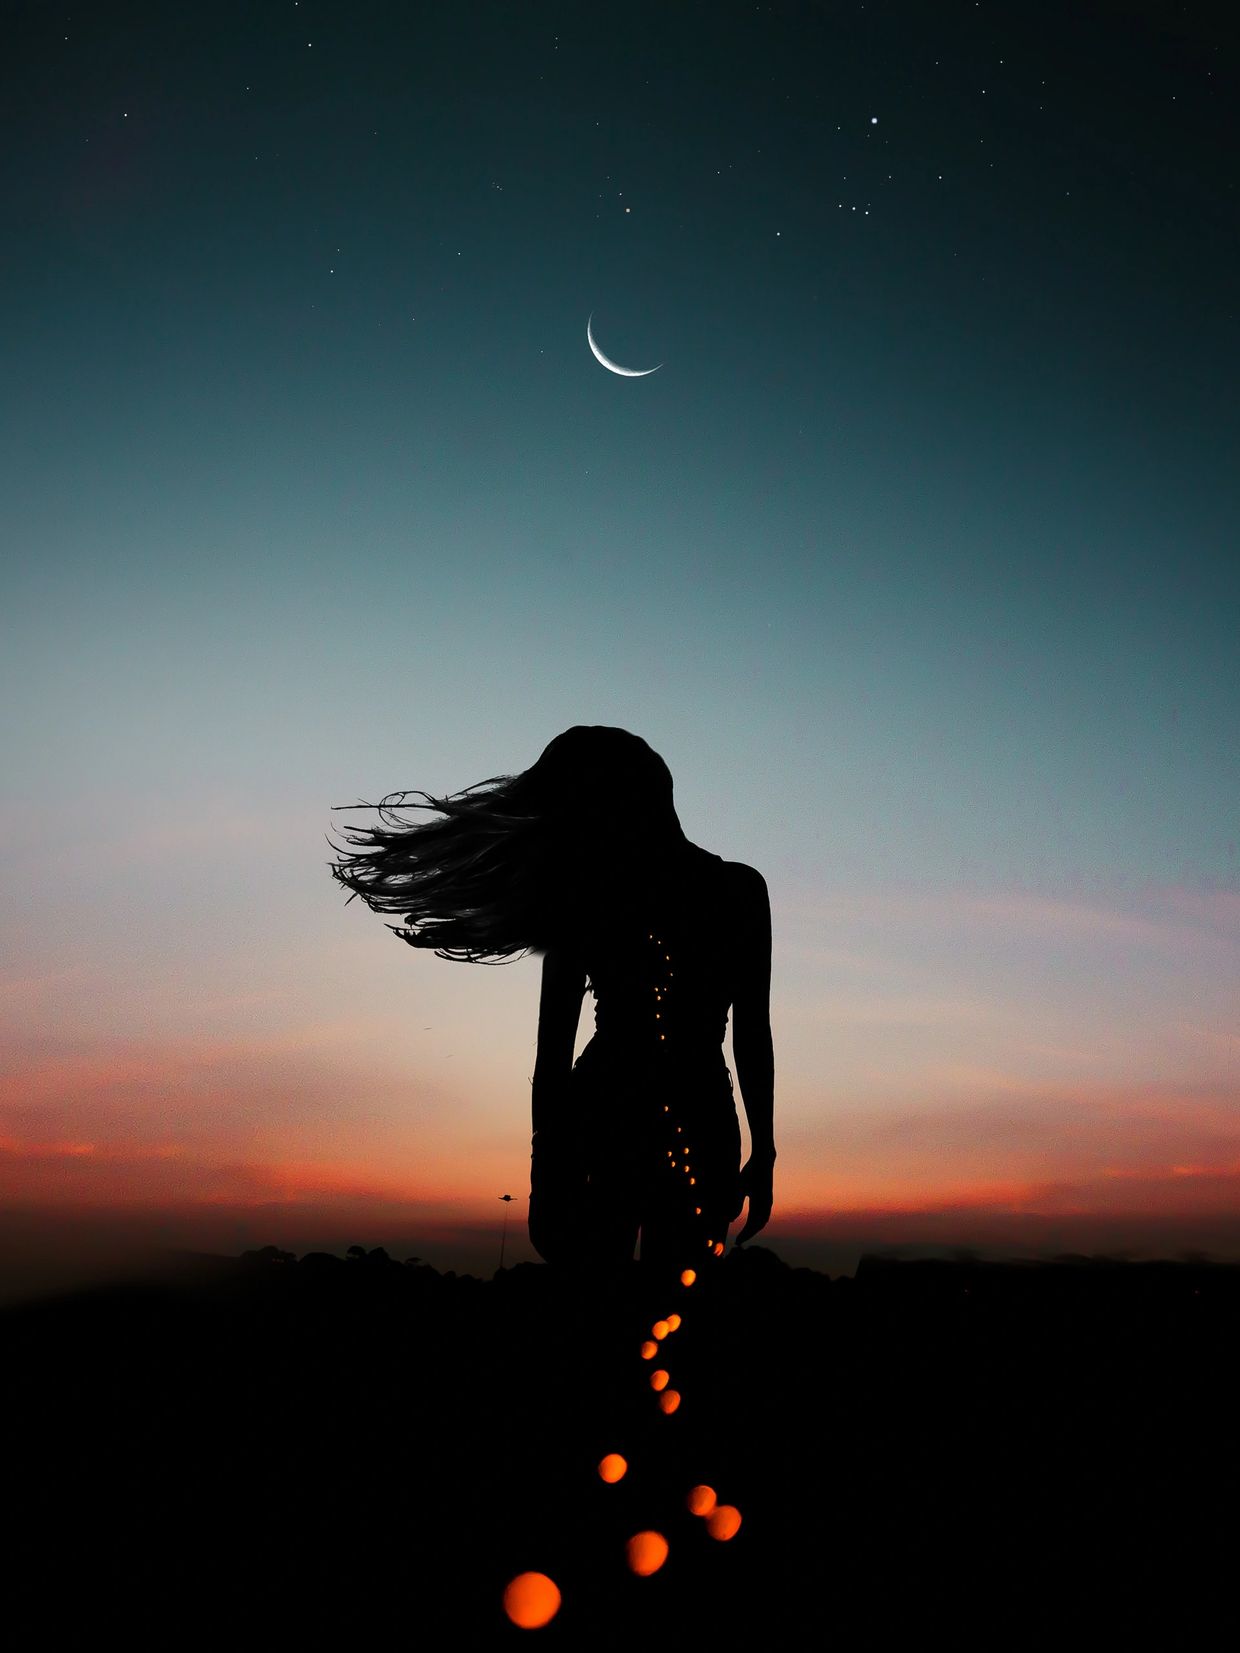 Silhouette of a woman with her hair blowing in the wind against the night sky with the crescent moon